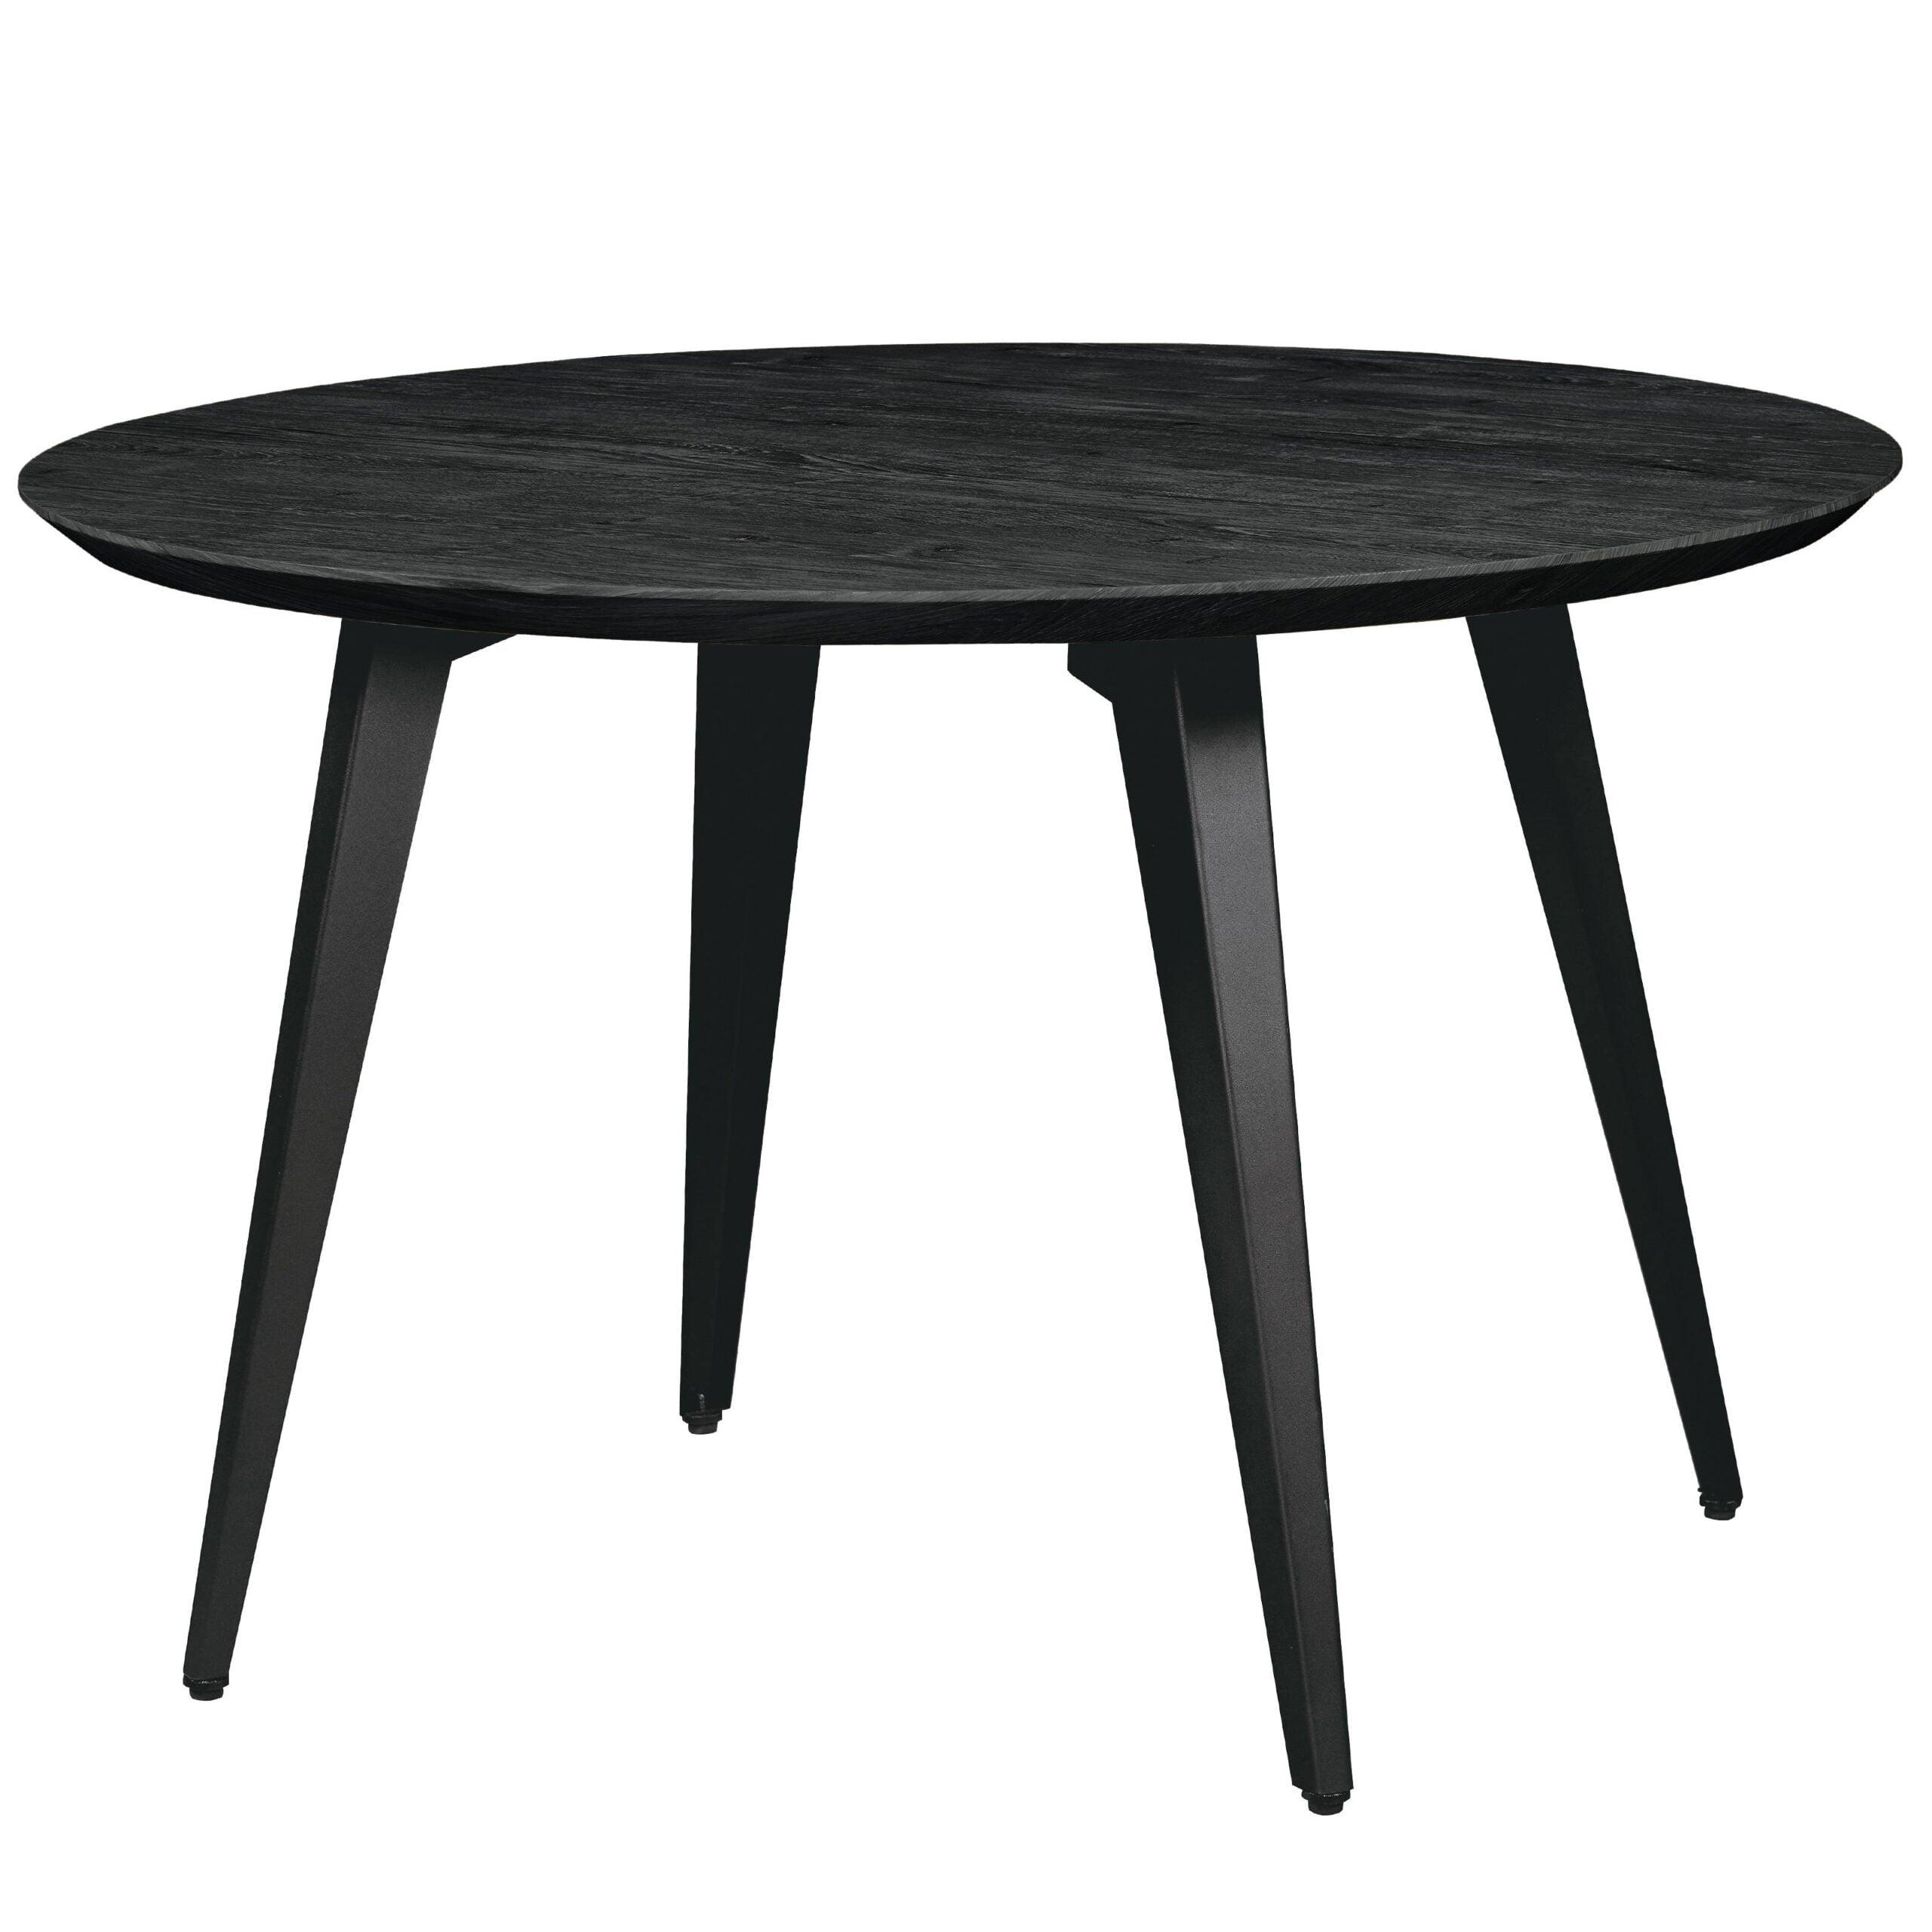 Ravenna 47" Round Ebony Wood Dining Table with Metal Accents